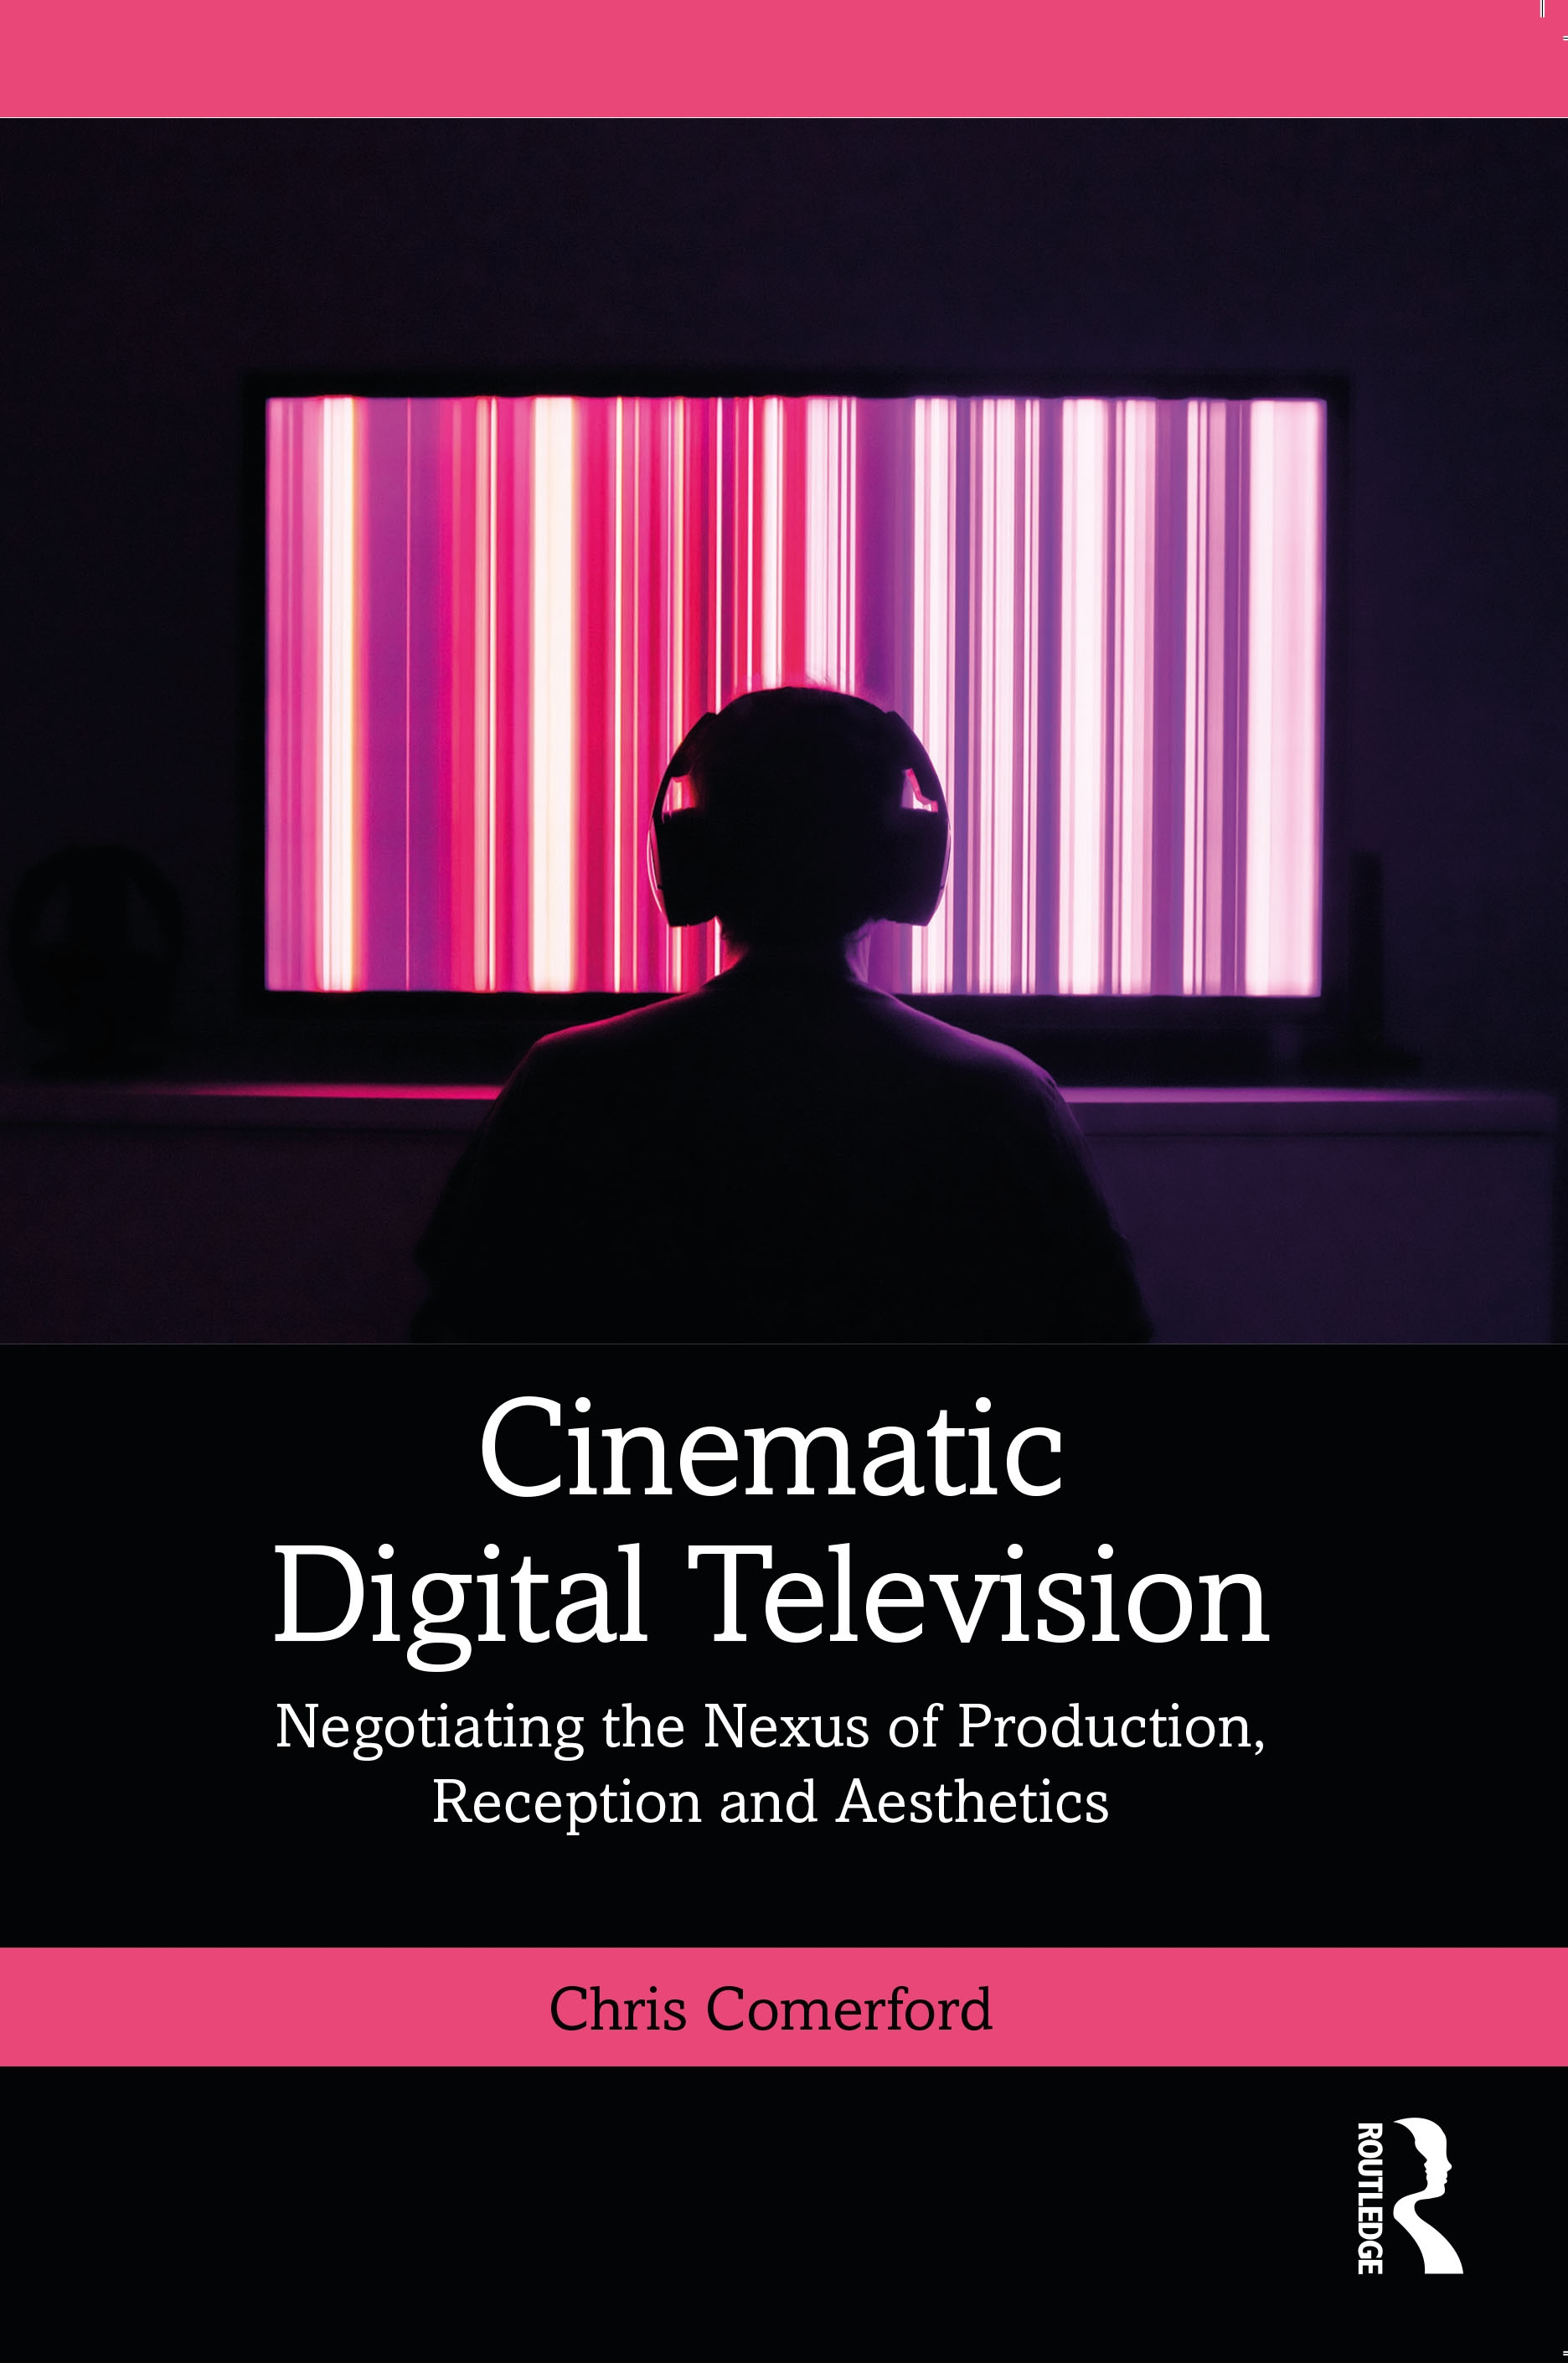 Cinematic Digital Television: Negotiating the Nexus of Production, Reception and Aesthetics